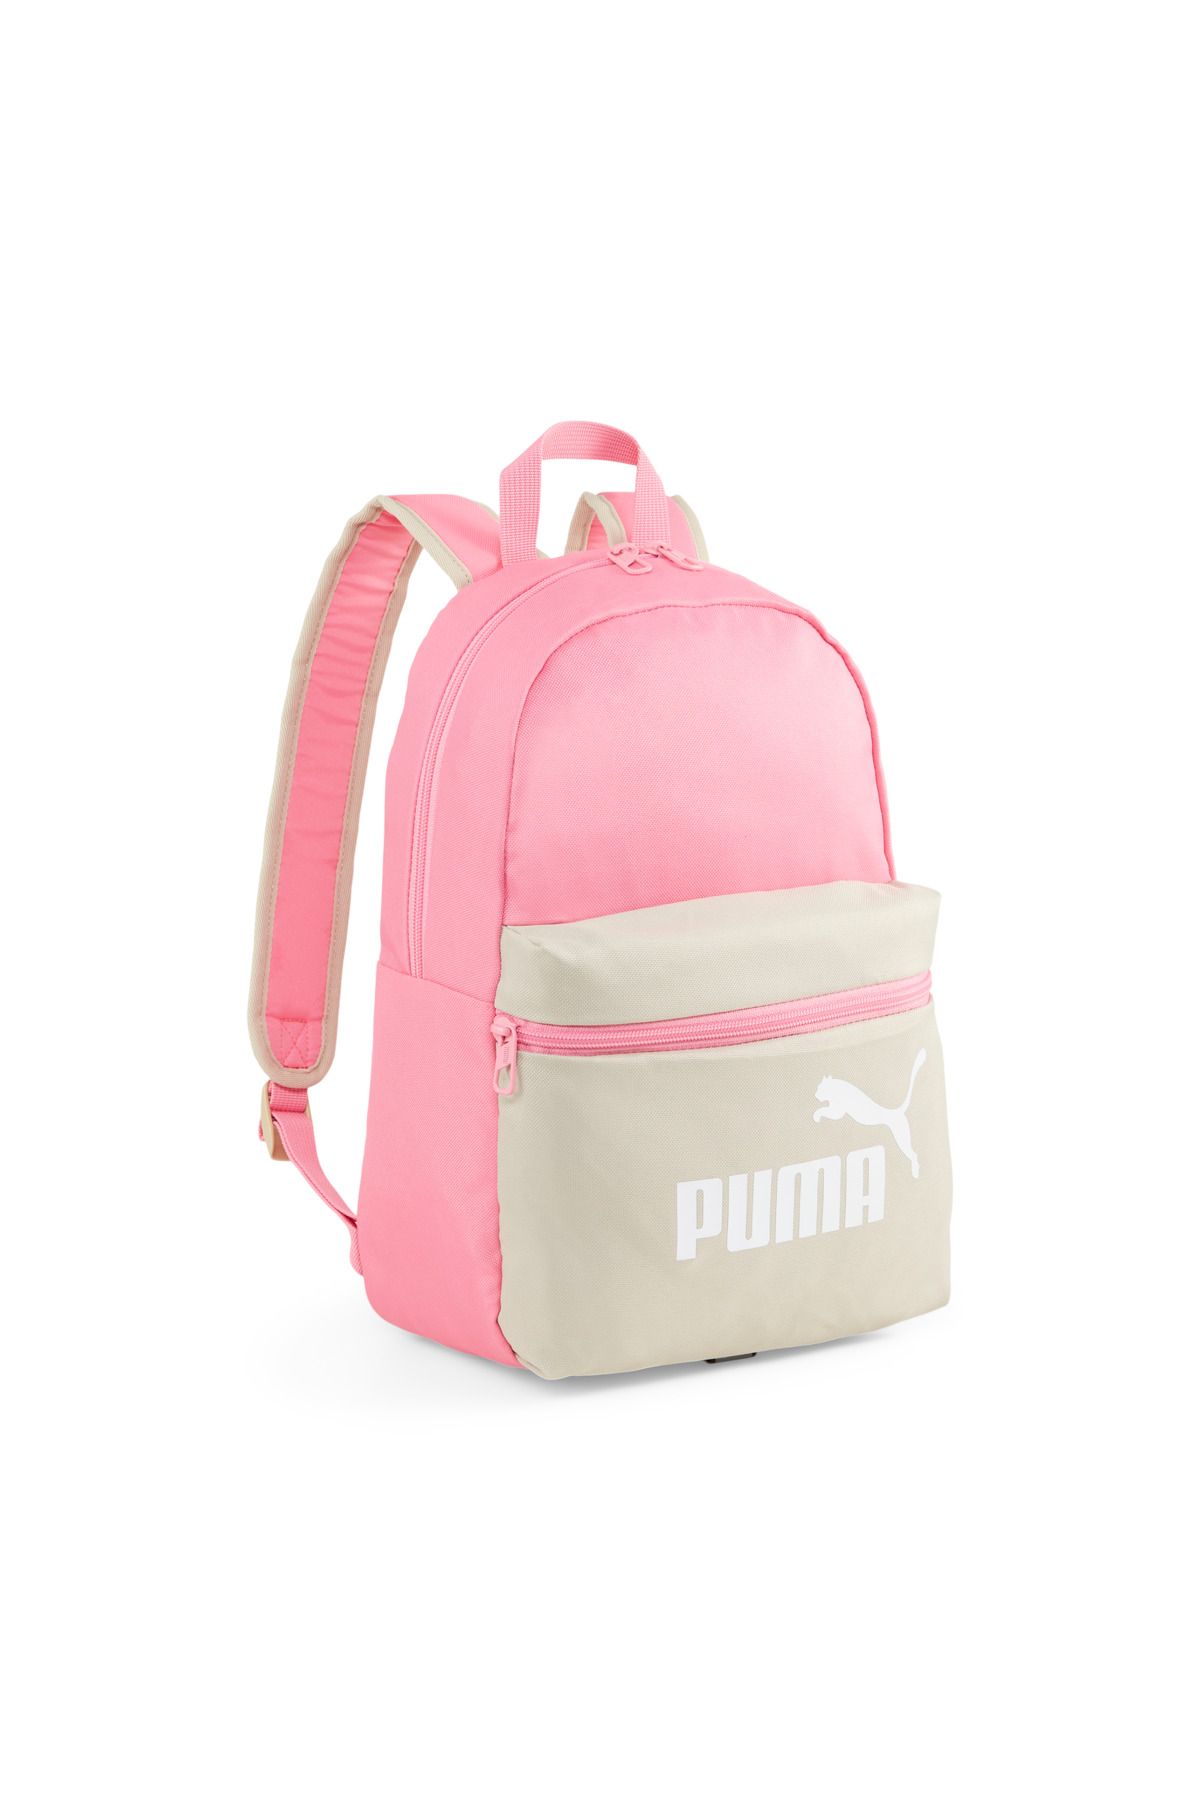 Puma Phase Small Backpack07987908